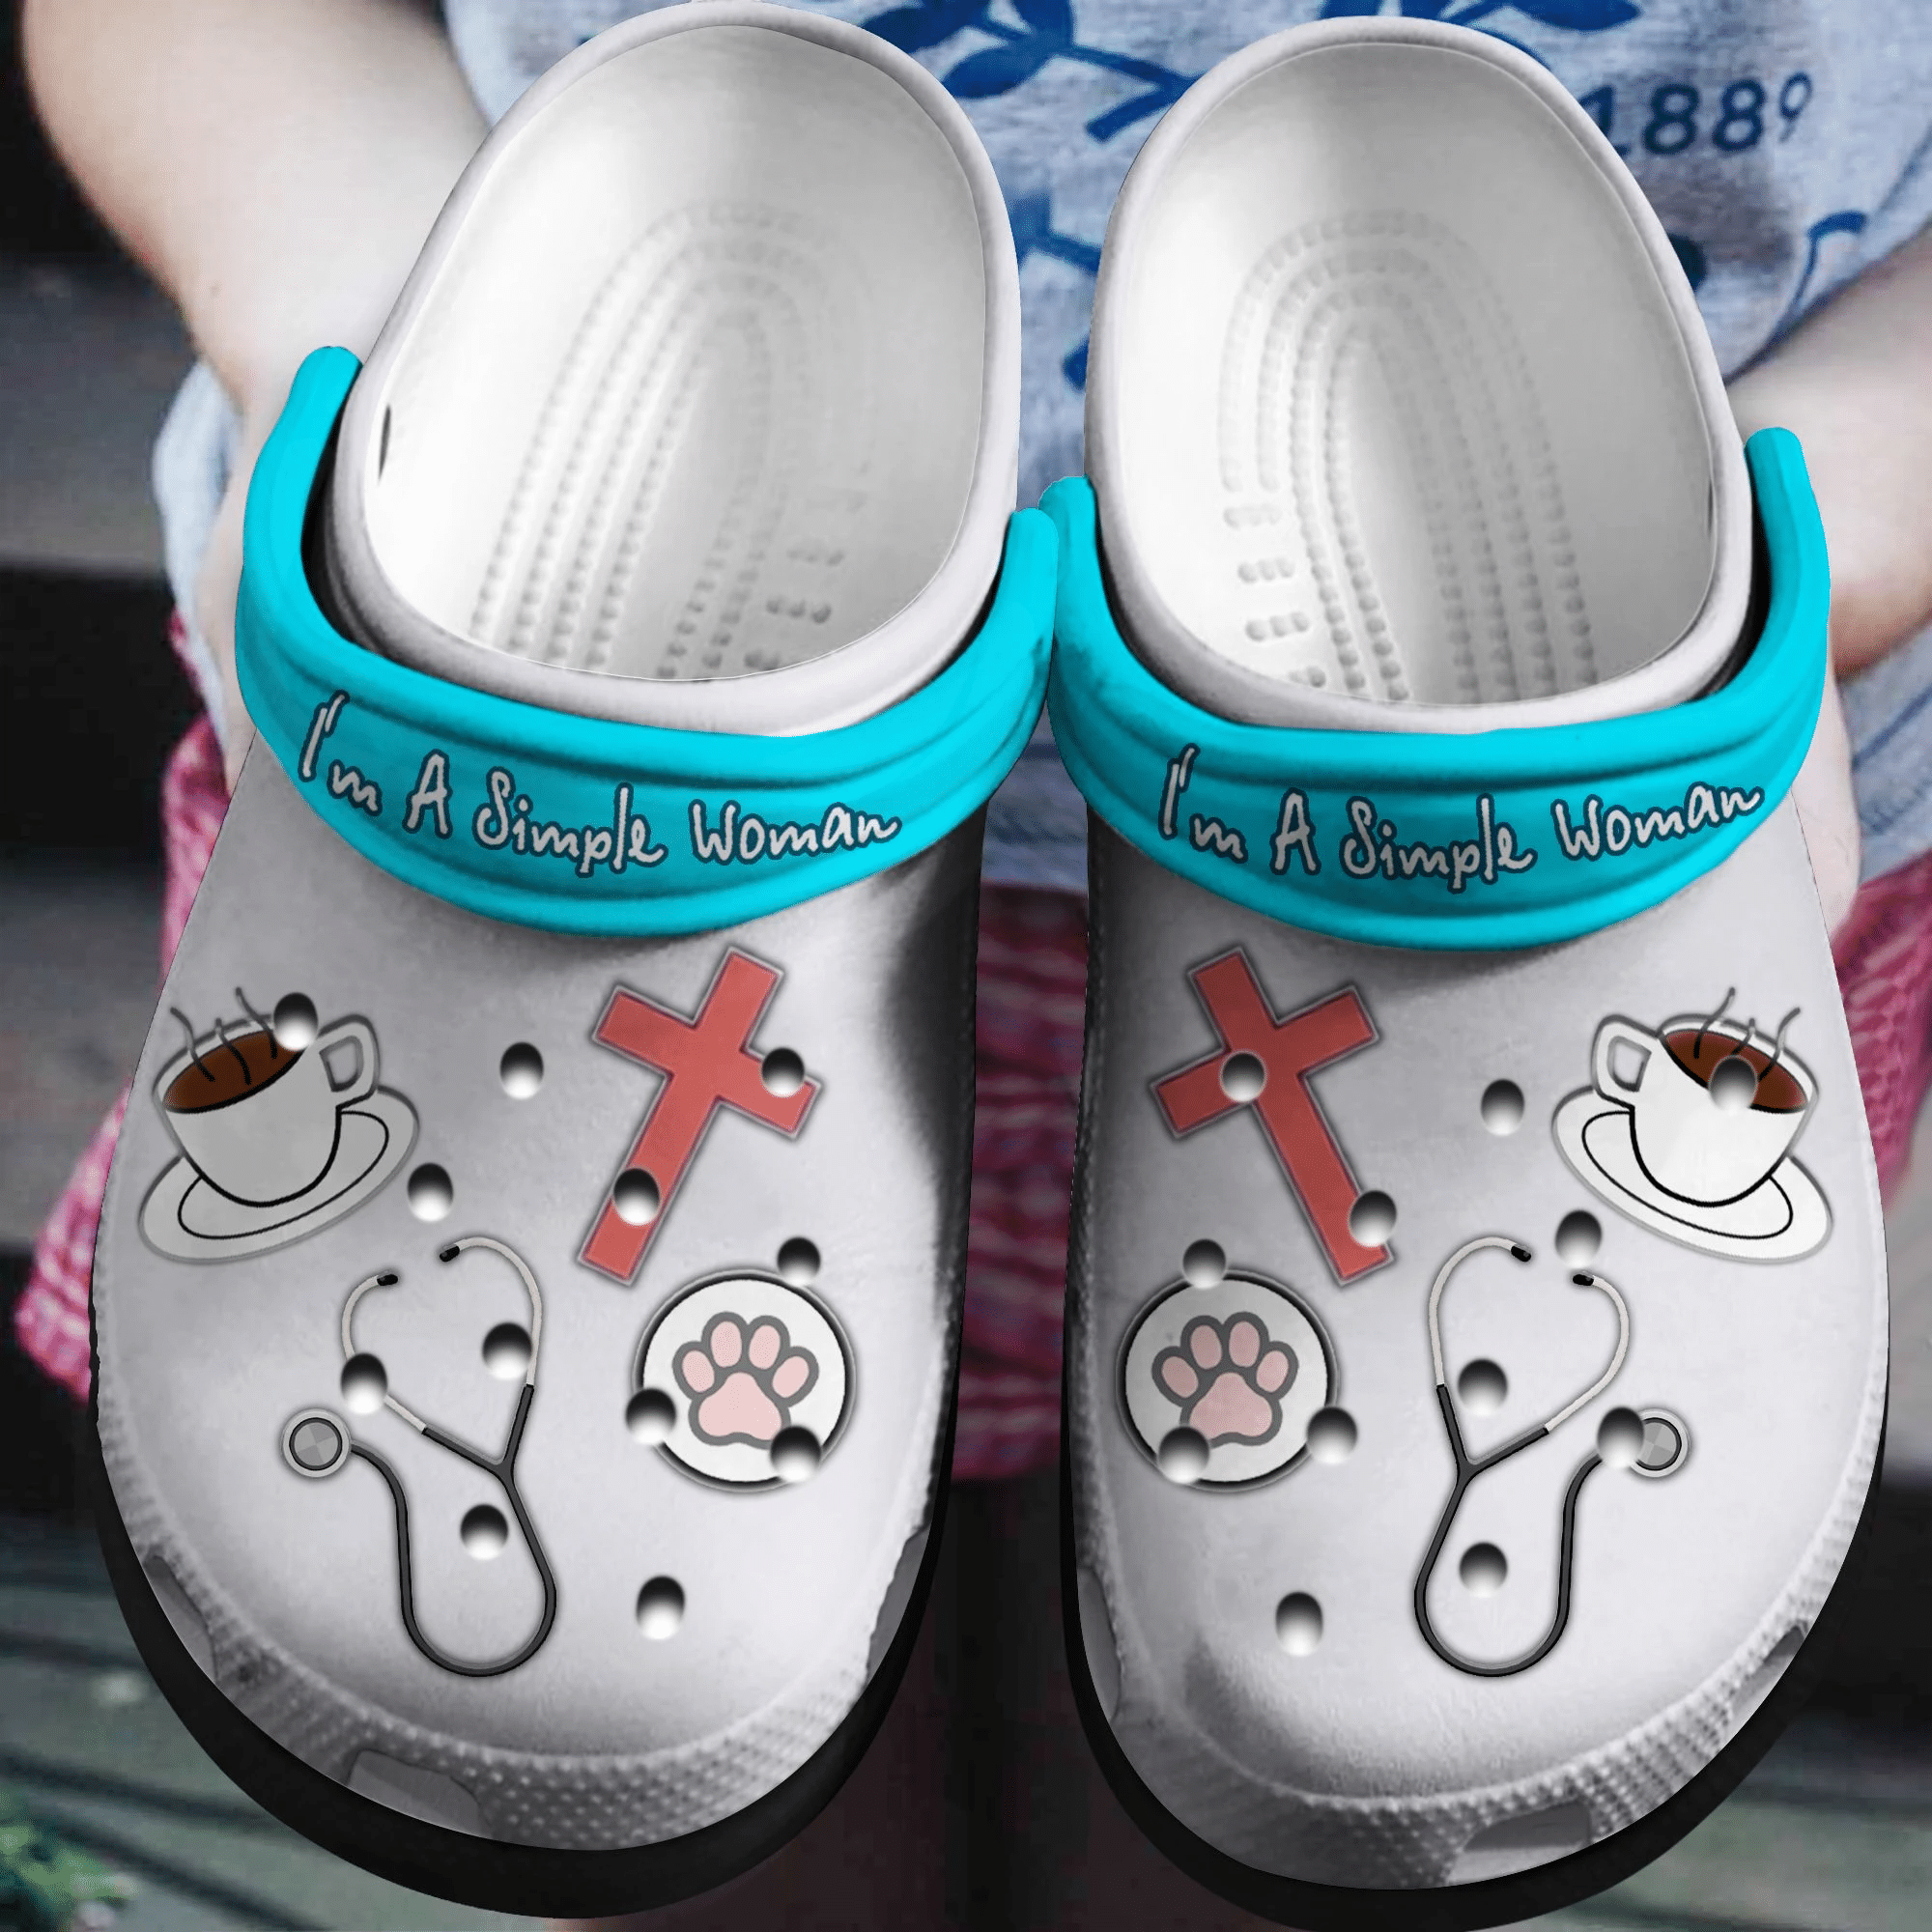 I'M A Simple Woman Crocs Shoes - Nurse Life With Cute Cat Crocbland Clog Birthday Gift For Woman Girl Friend